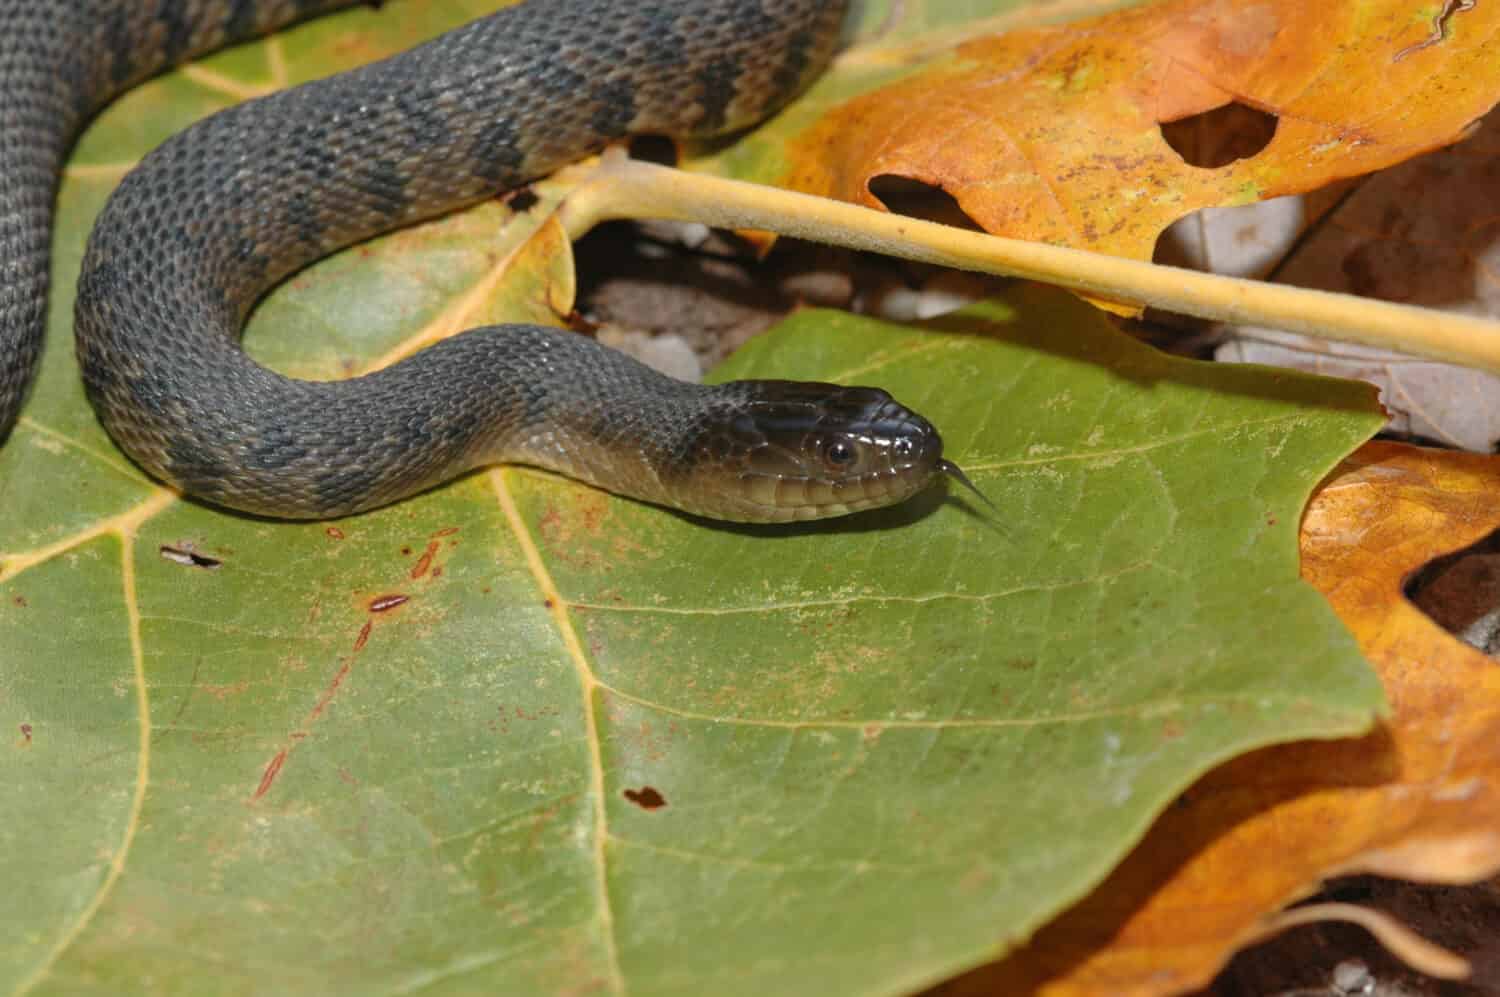 The Mississippi green watersnake is a threatened species in much of it's natural range.